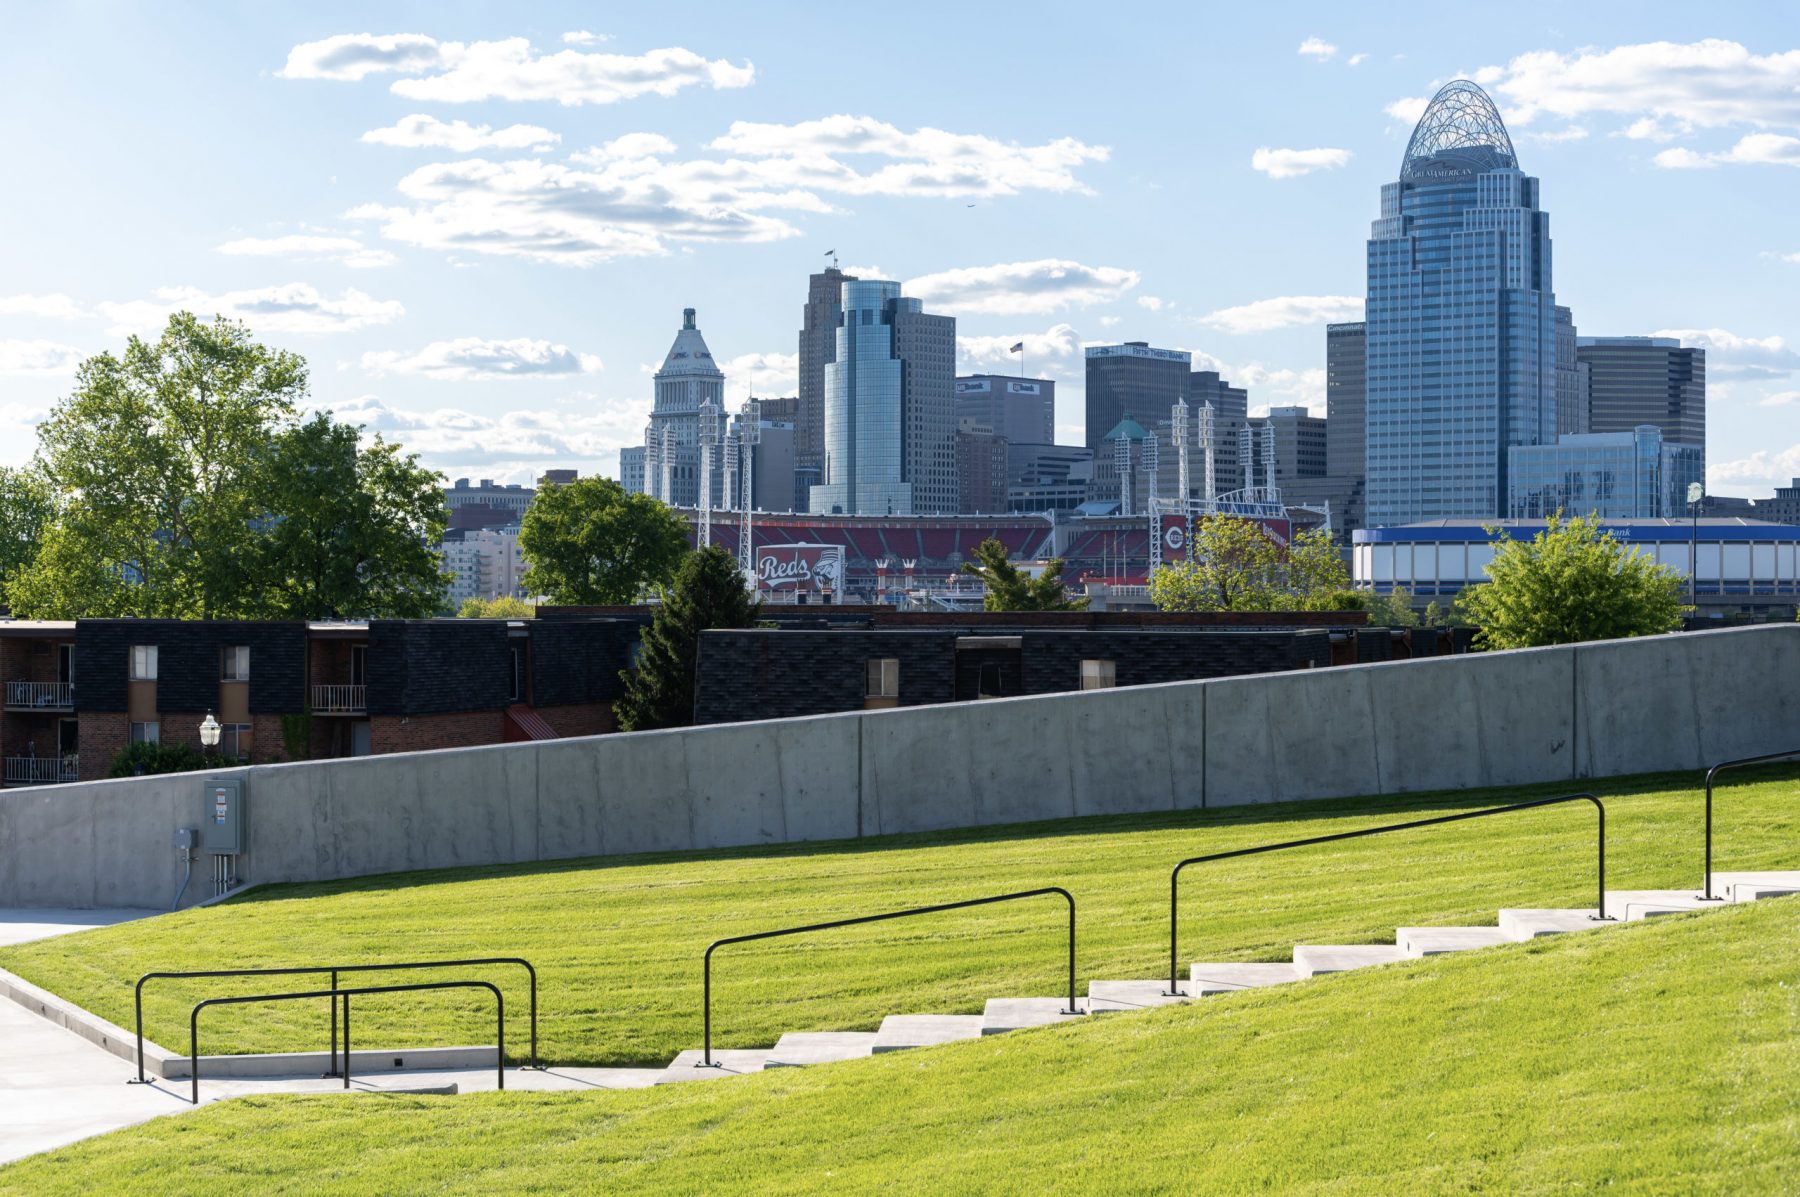 Downtown Cincinnati can be admired from the outdoor ampitheater. Photo by Phil Armstrong.